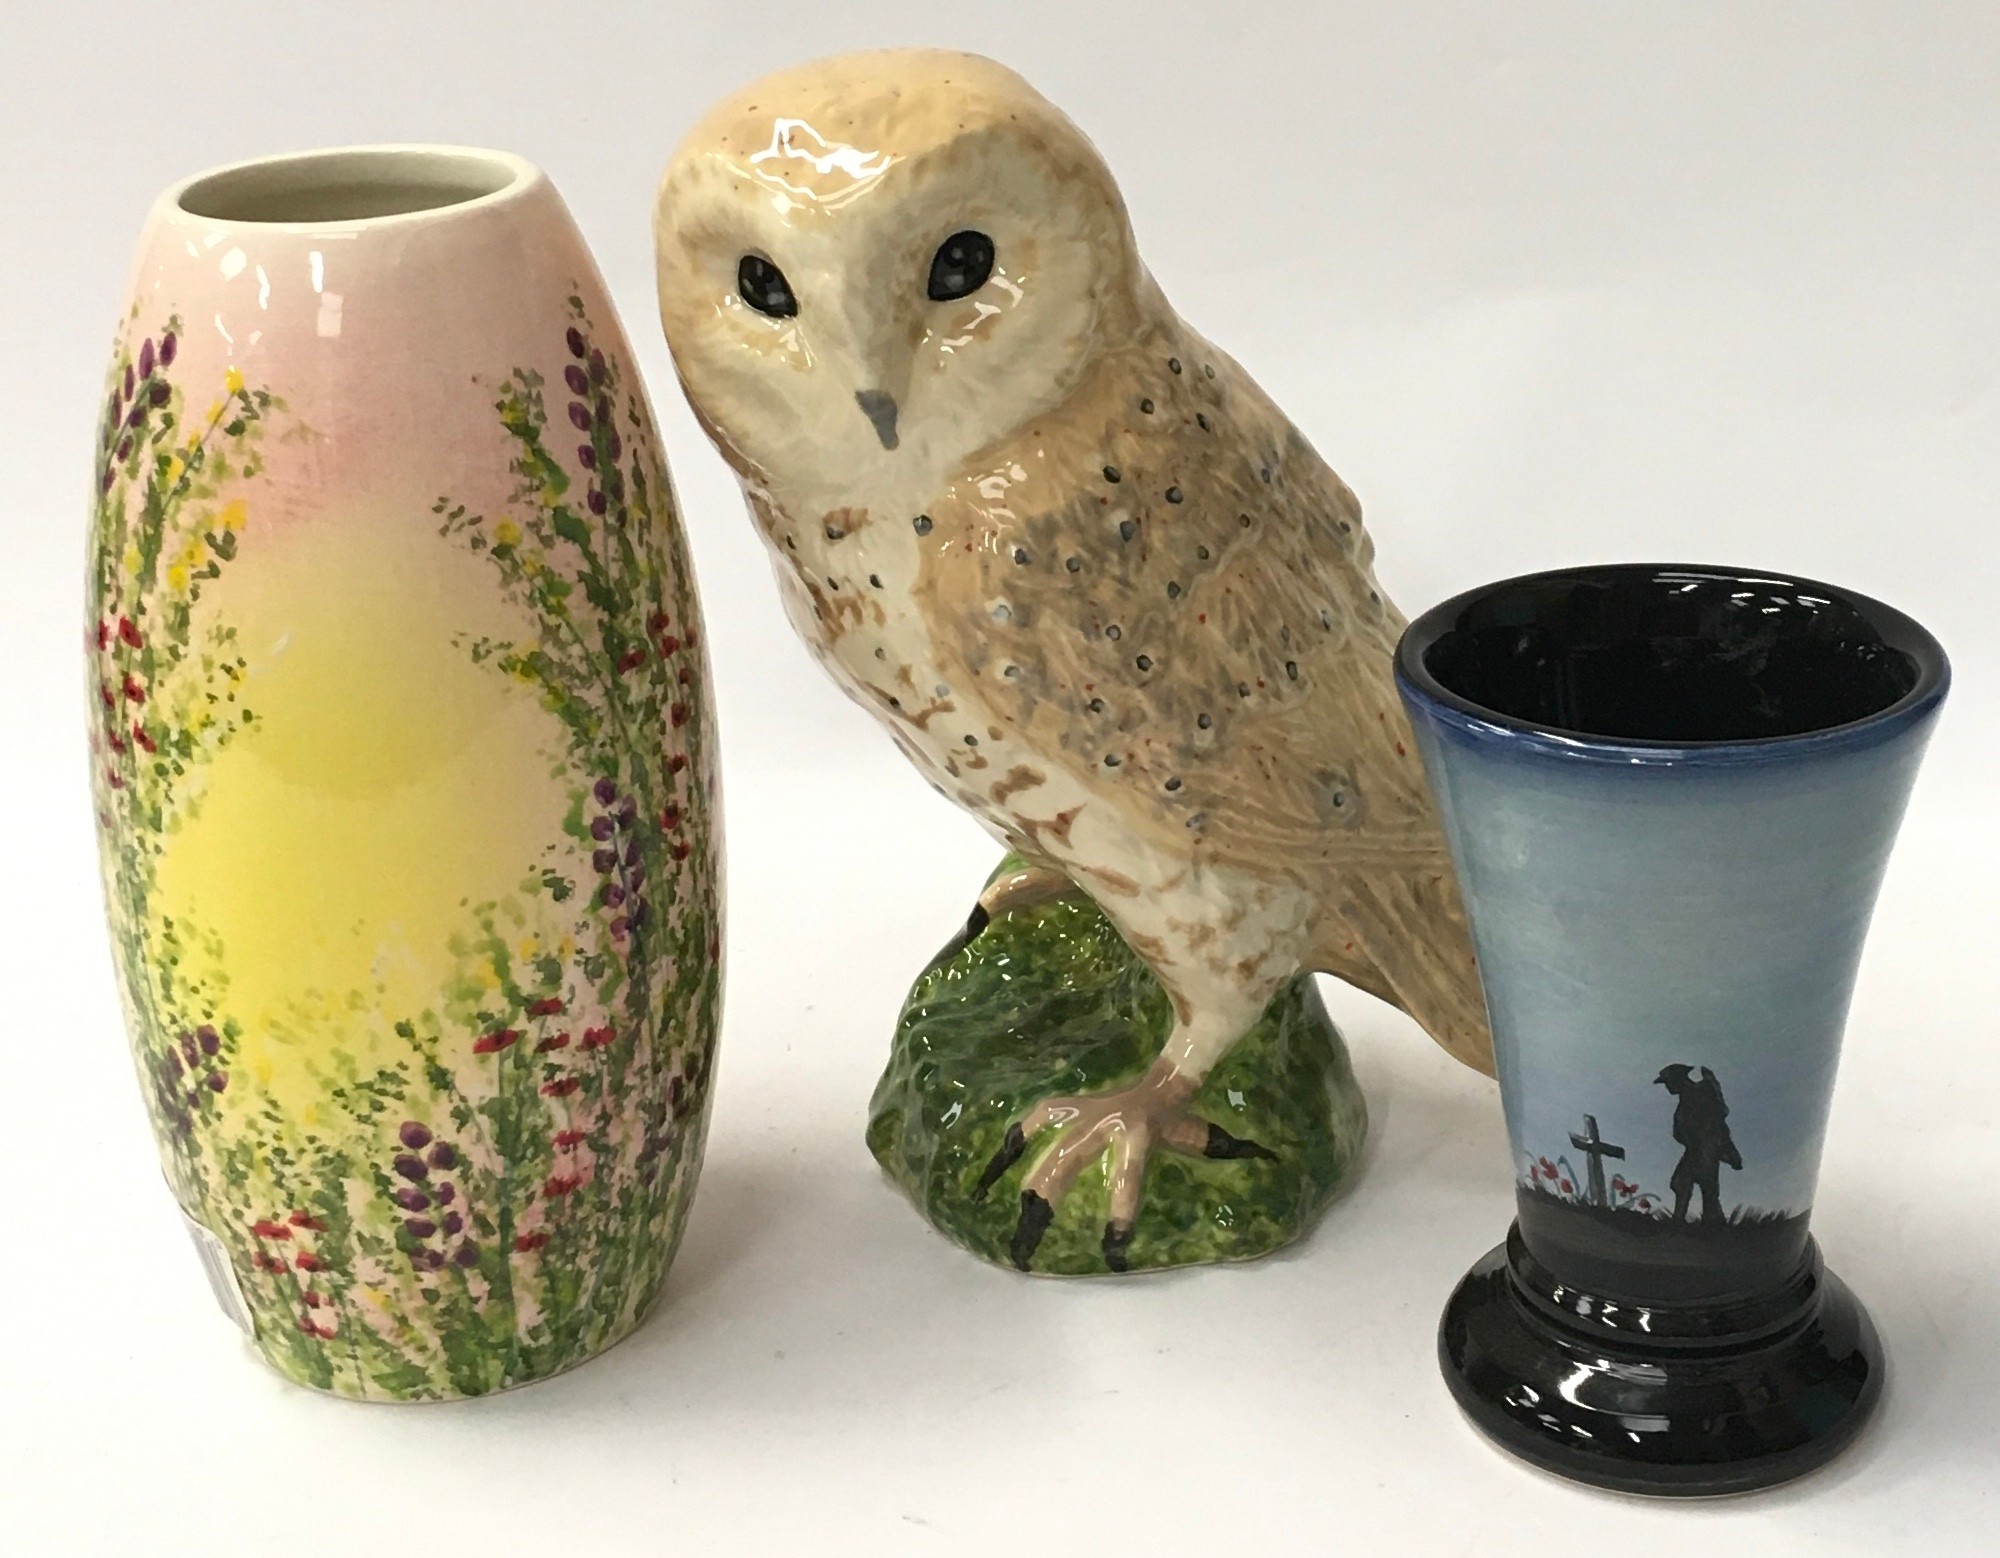 Studio Poole model of an Owl, together with a small remembrance vase by Alan White & Lorna Whitmarsh